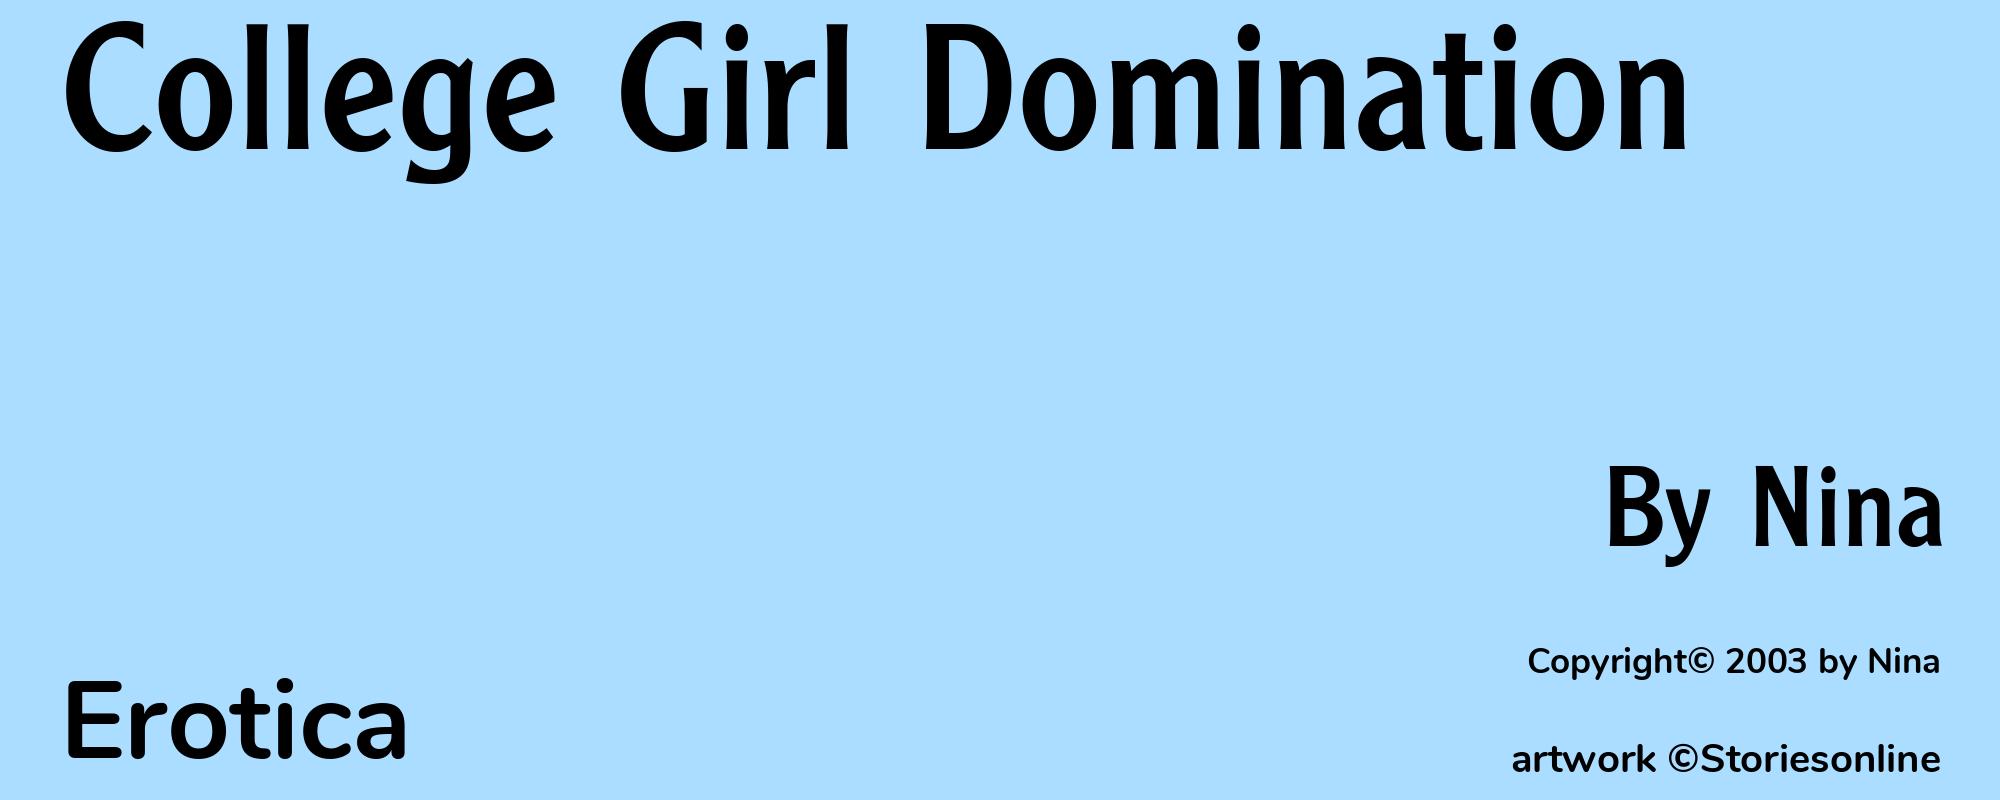 College Girl Domination - Cover